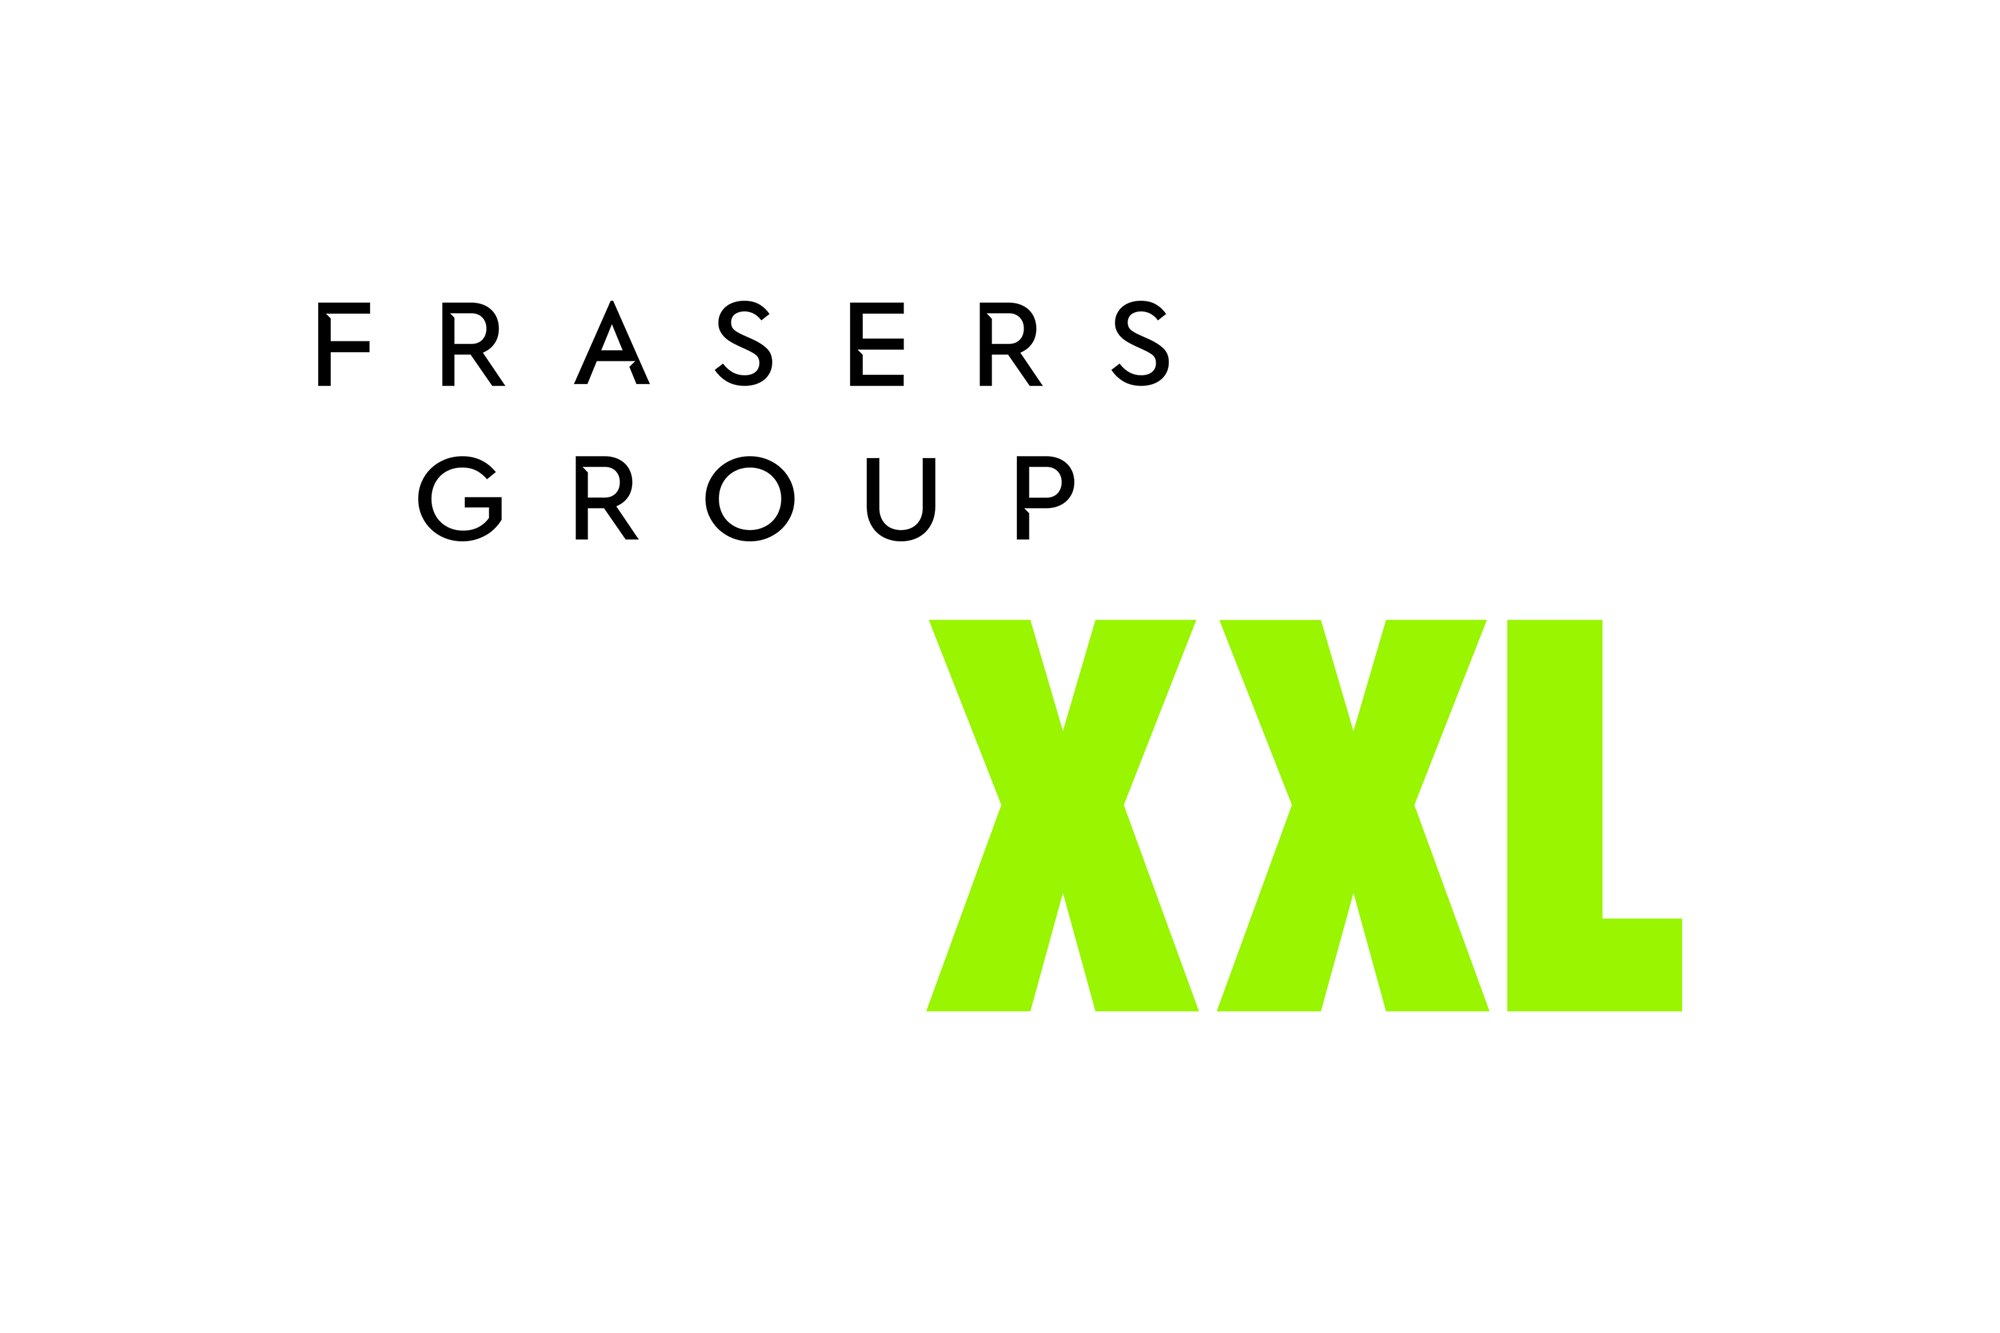 Frasers Group acquires greater stake in XXL